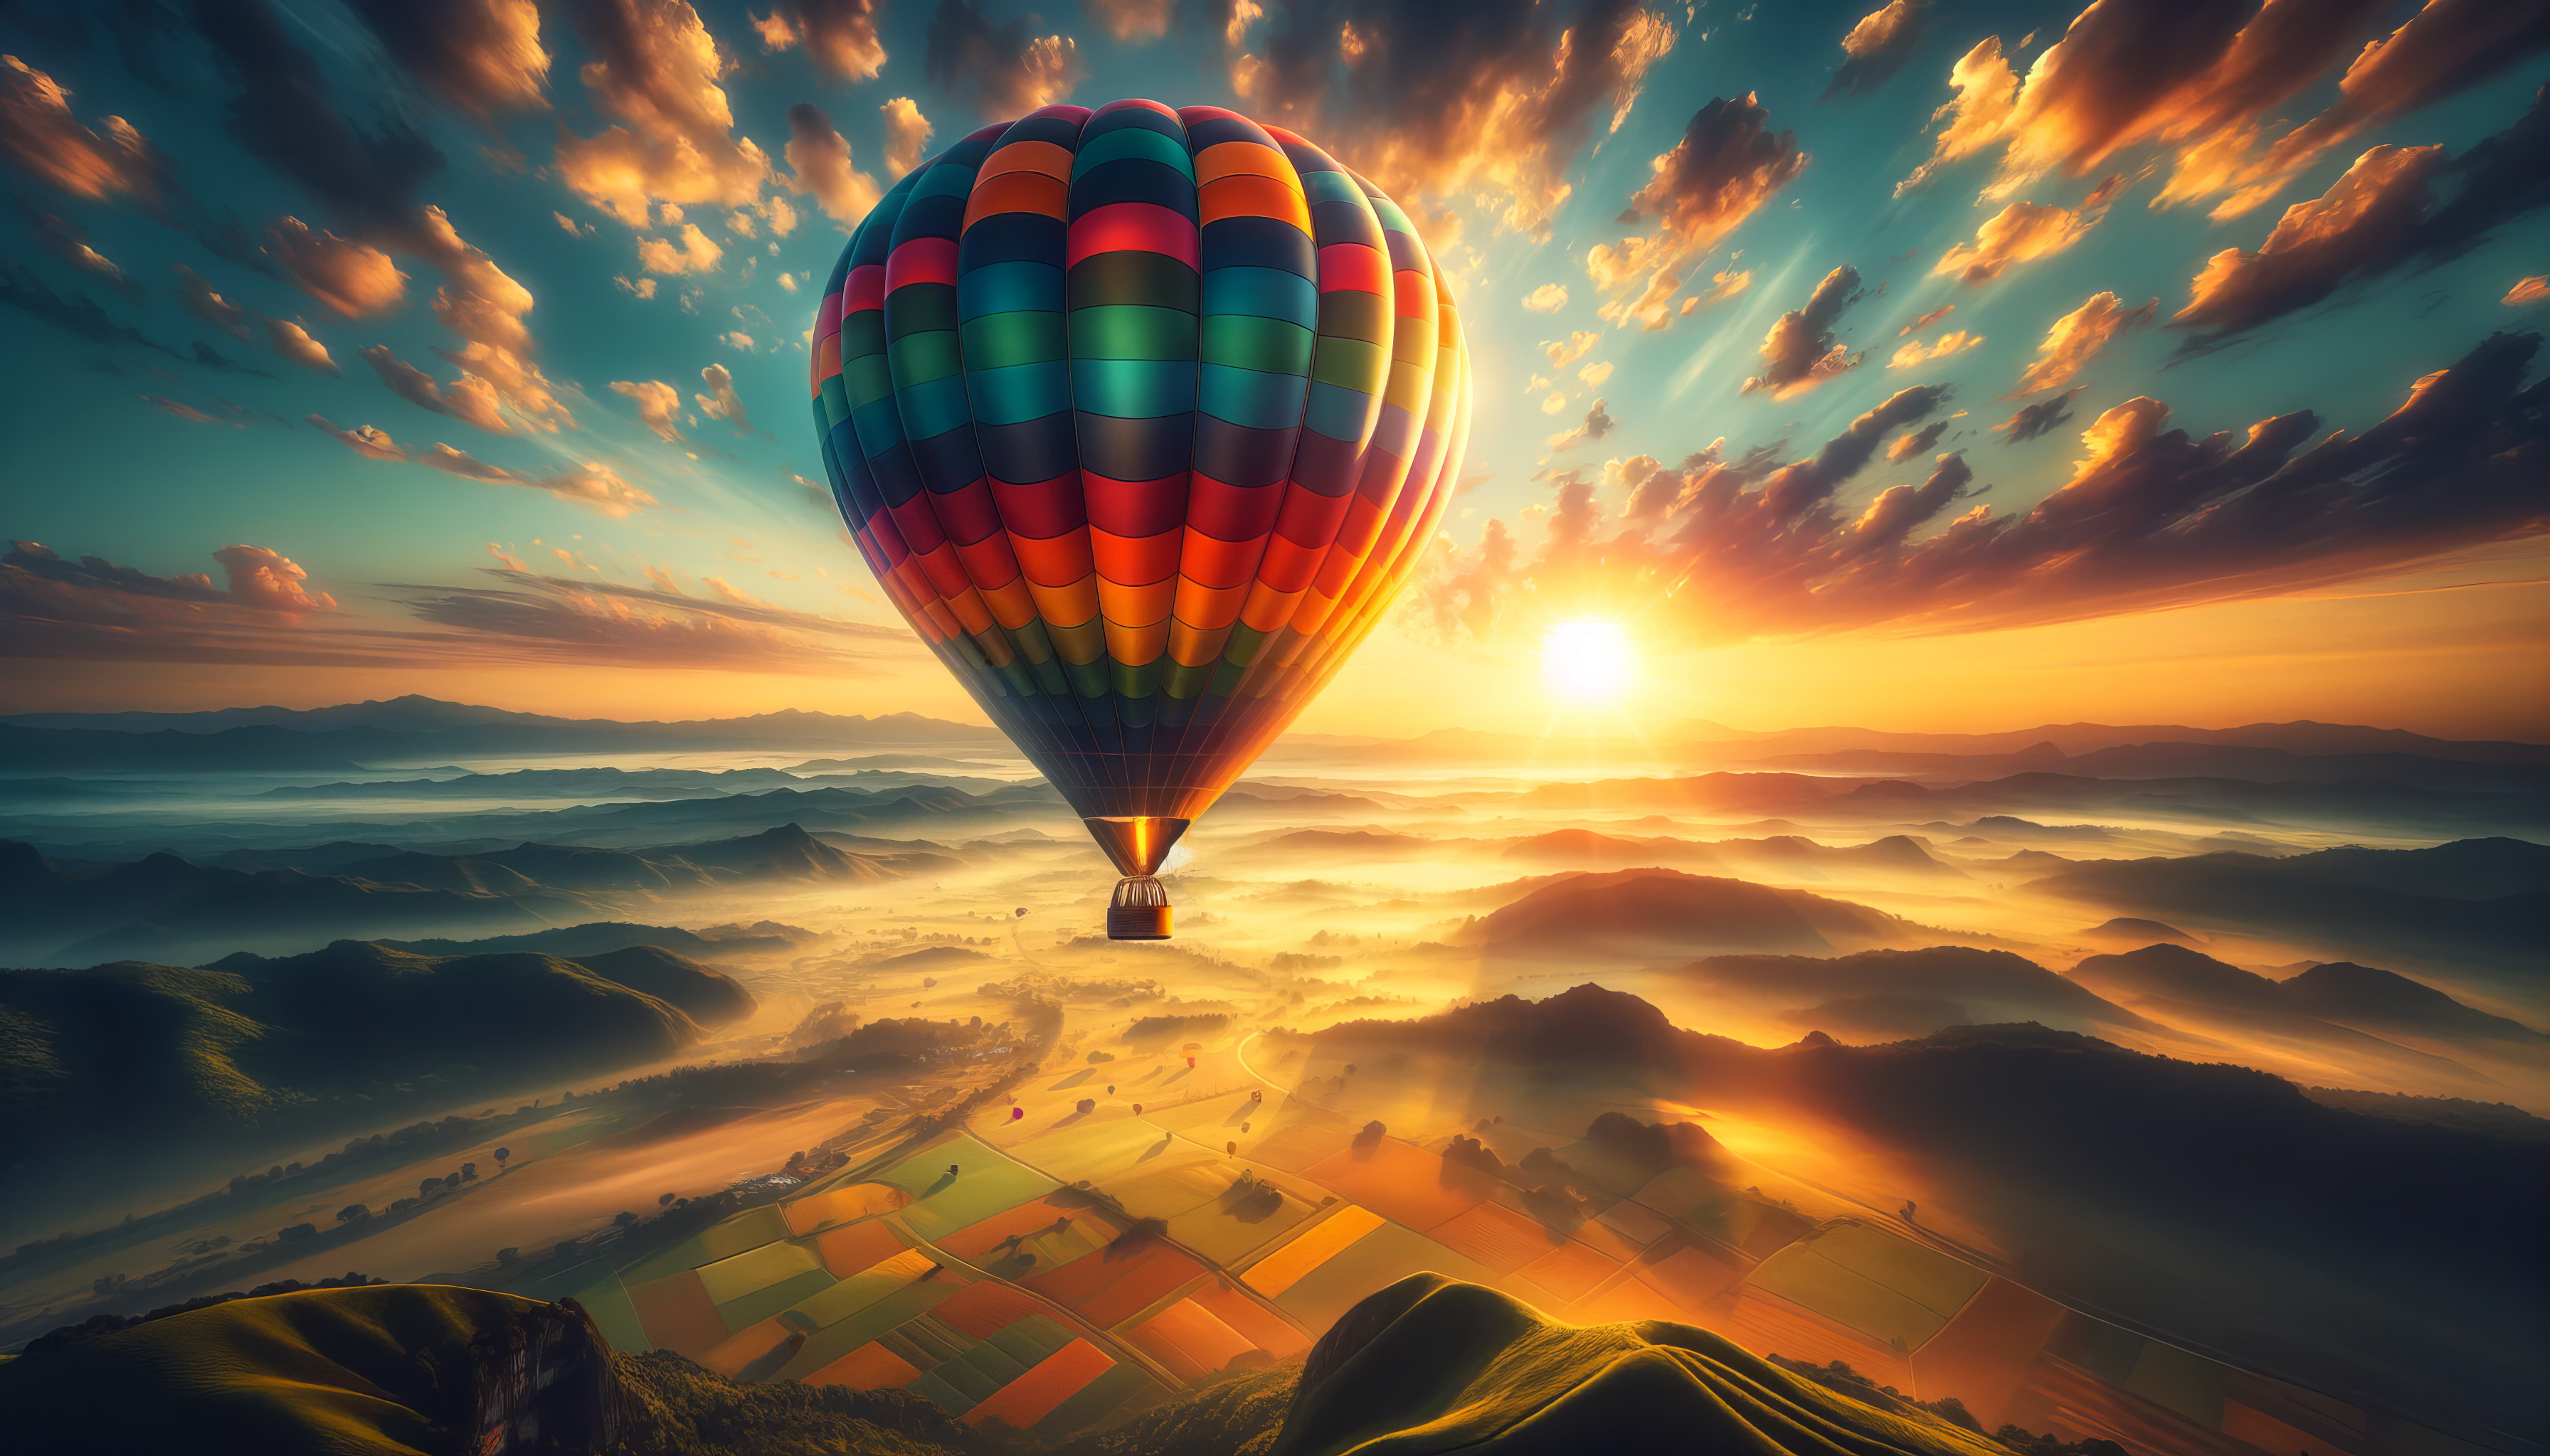 Air Balloon Background Image 3584x2048